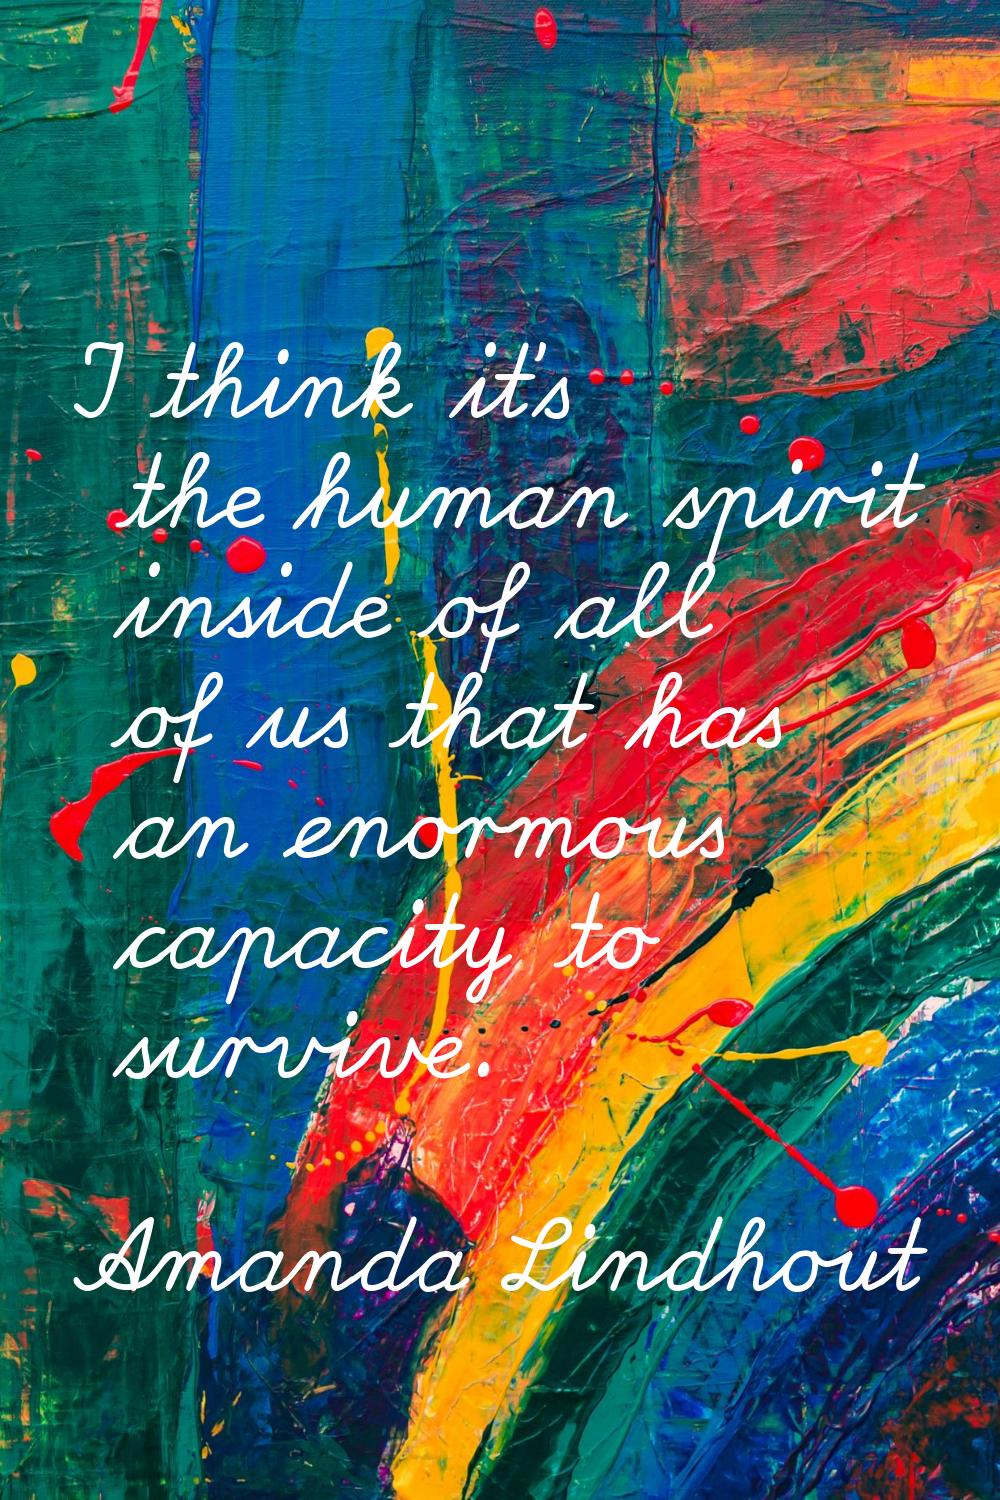 I think it's the human spirit inside of all of us that has an enormous capacity to survive.